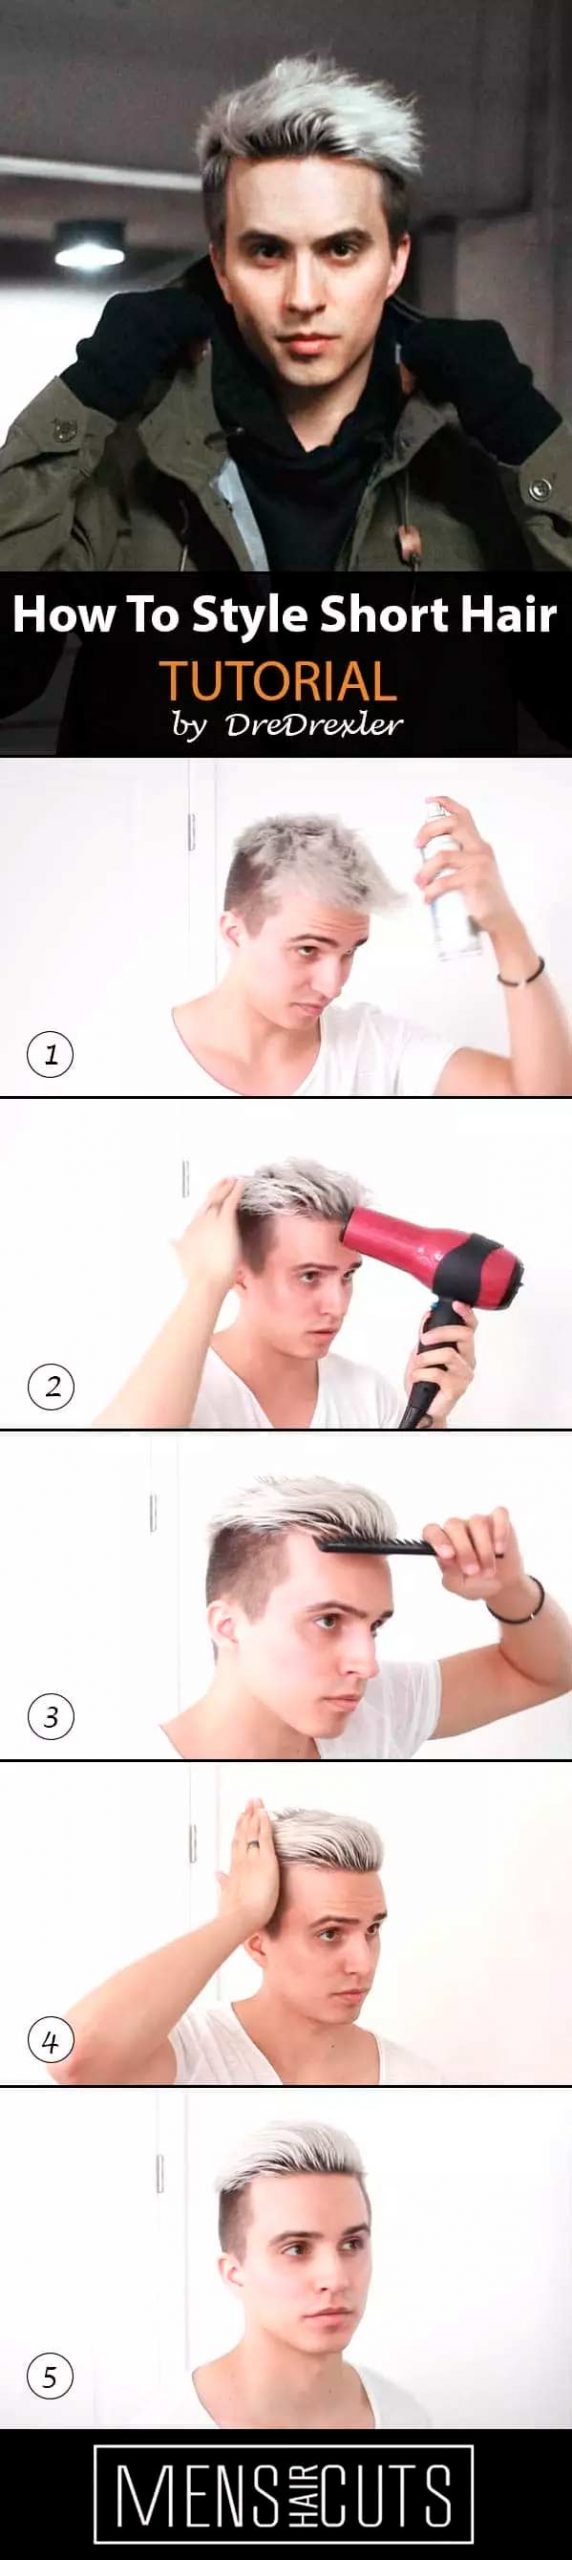 How To Style Short Hair With Undercut #howtostyleshorthair #howtostyleshorthairmen